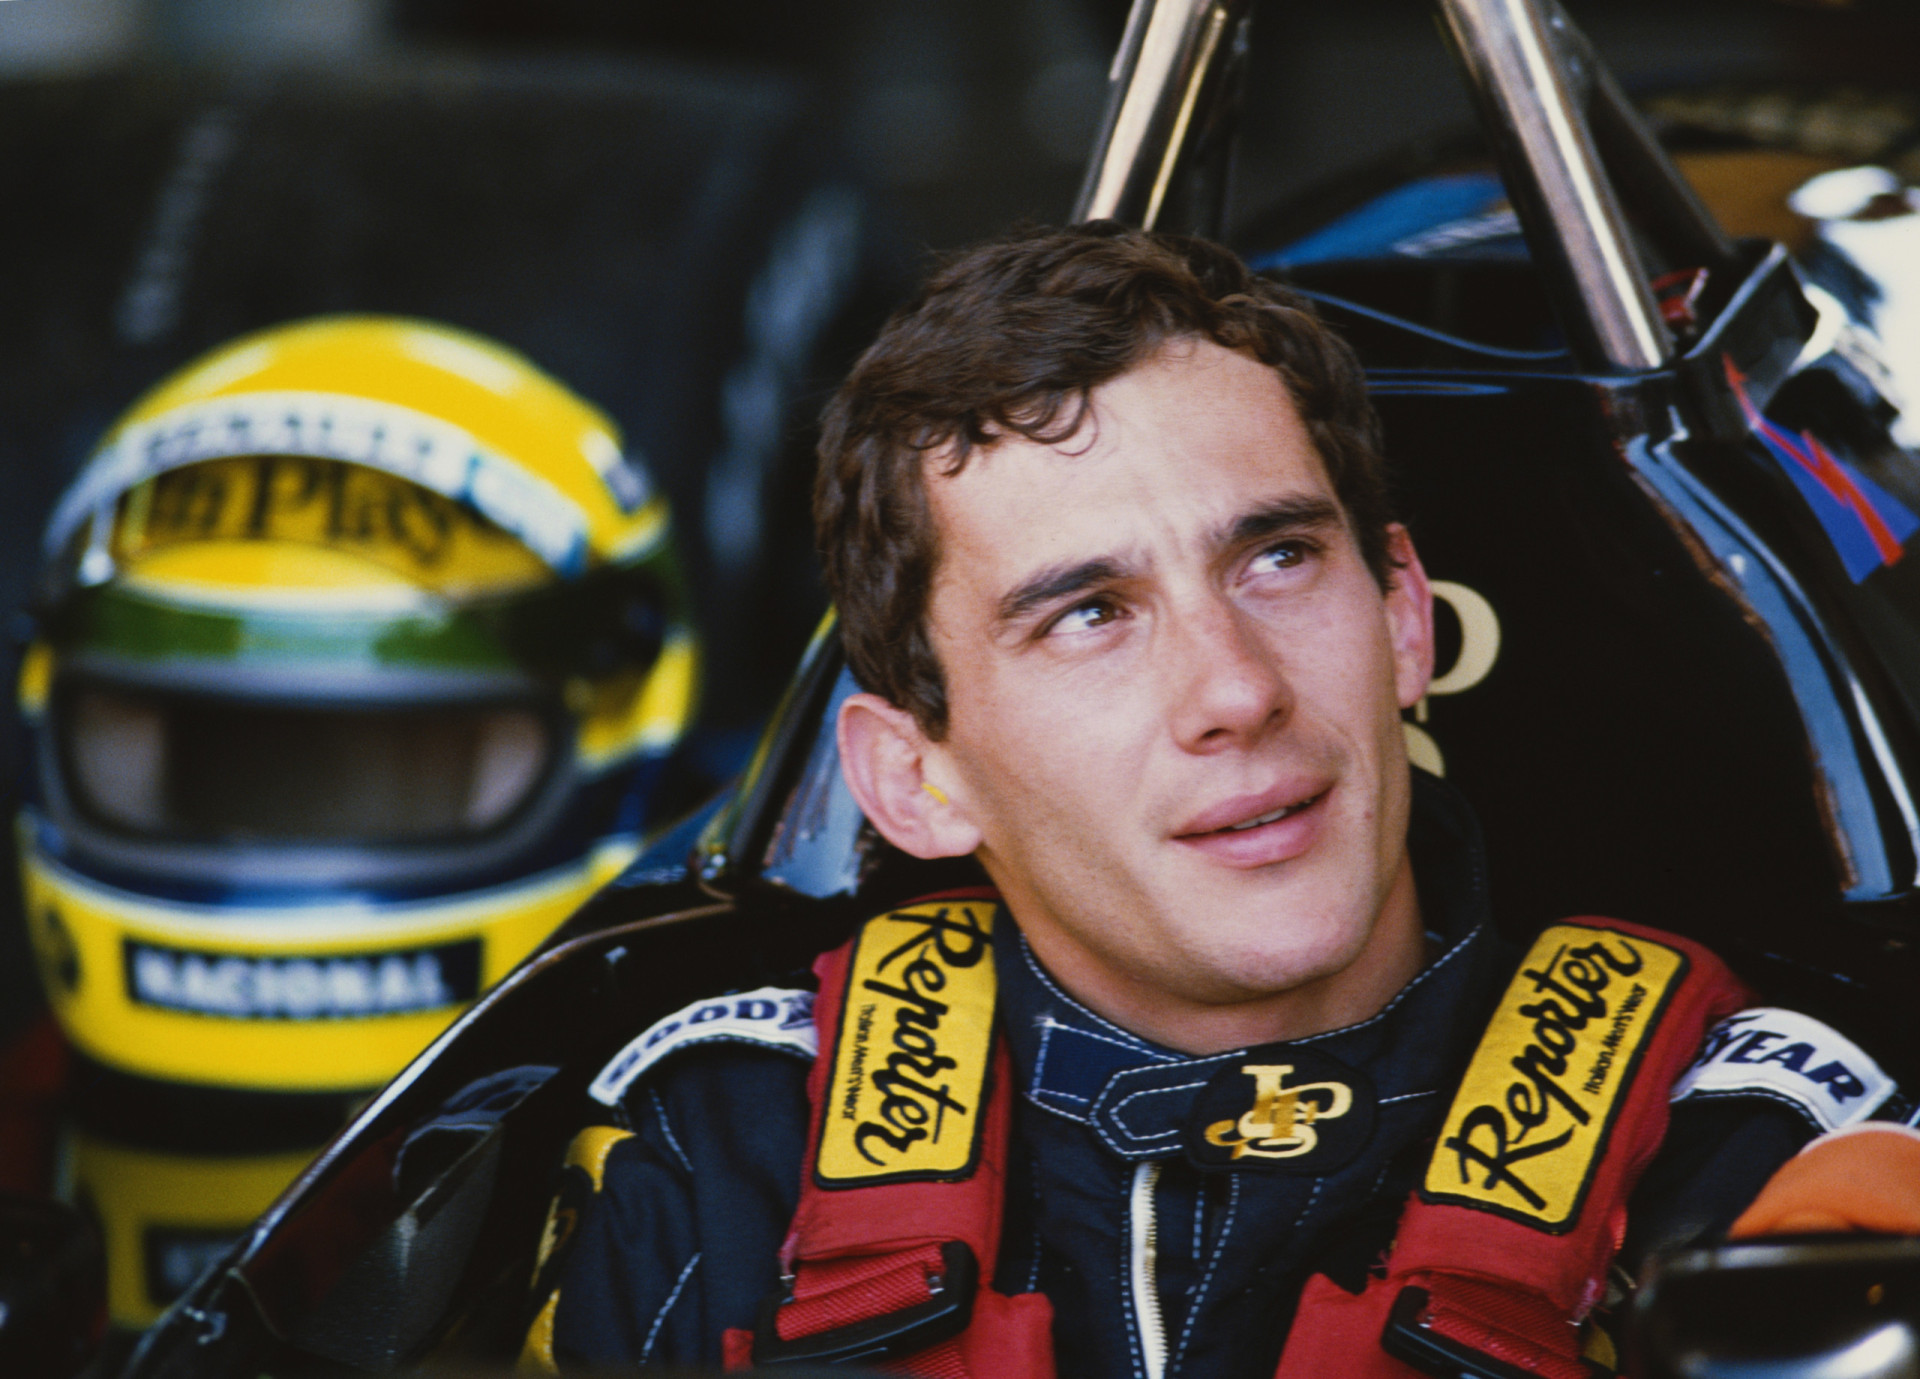 <p>Senna remained with Lotus throughout 1986 and 1987. In '86, he clinched eight pole positions and eight podiums.</p><p>You may also like:<a href="https://www.starsinsider.com/n/368808?utm_source=msn.com&utm_medium=display&utm_campaign=referral_description&utm_content=703485en-us"> Normandy beyond the beaches</a></p>